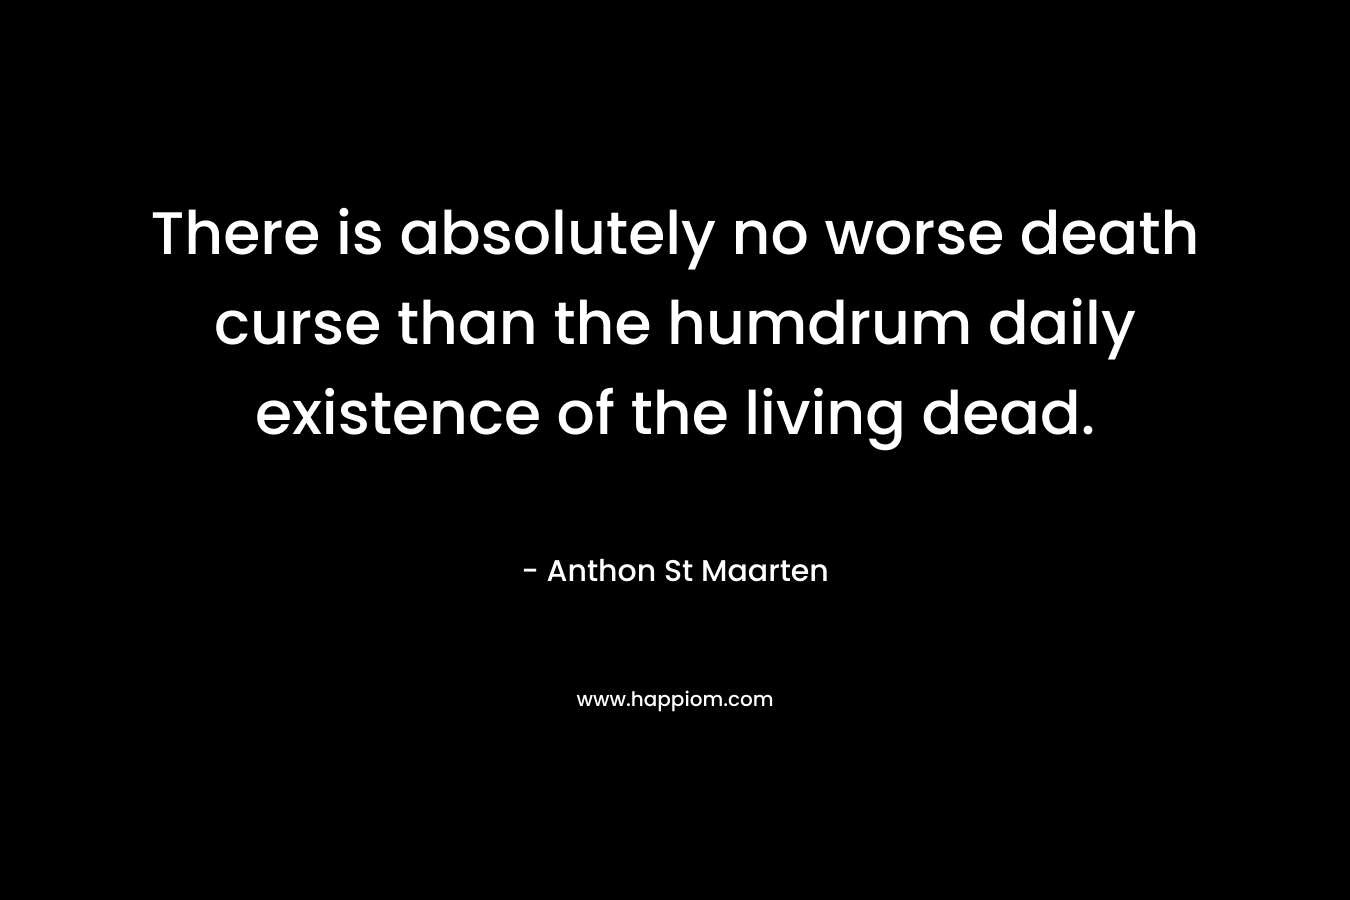 There is absolutely no worse death curse than the humdrum daily existence of the living dead.